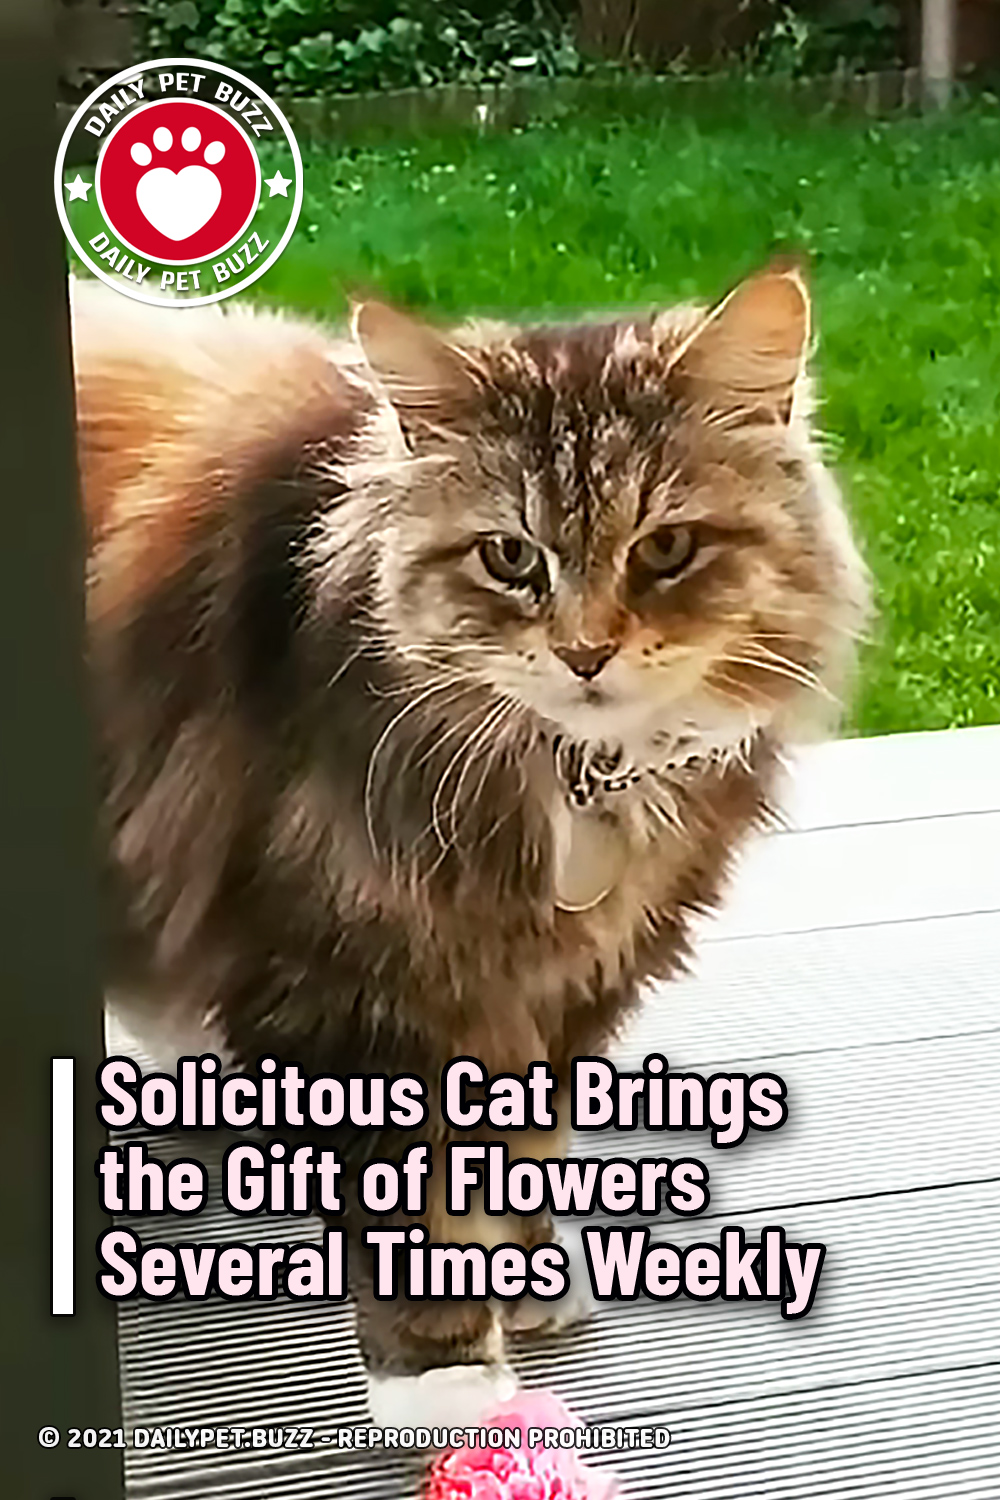 Solicitous Cat Brings the Gift of Flowers Several Times Weekly